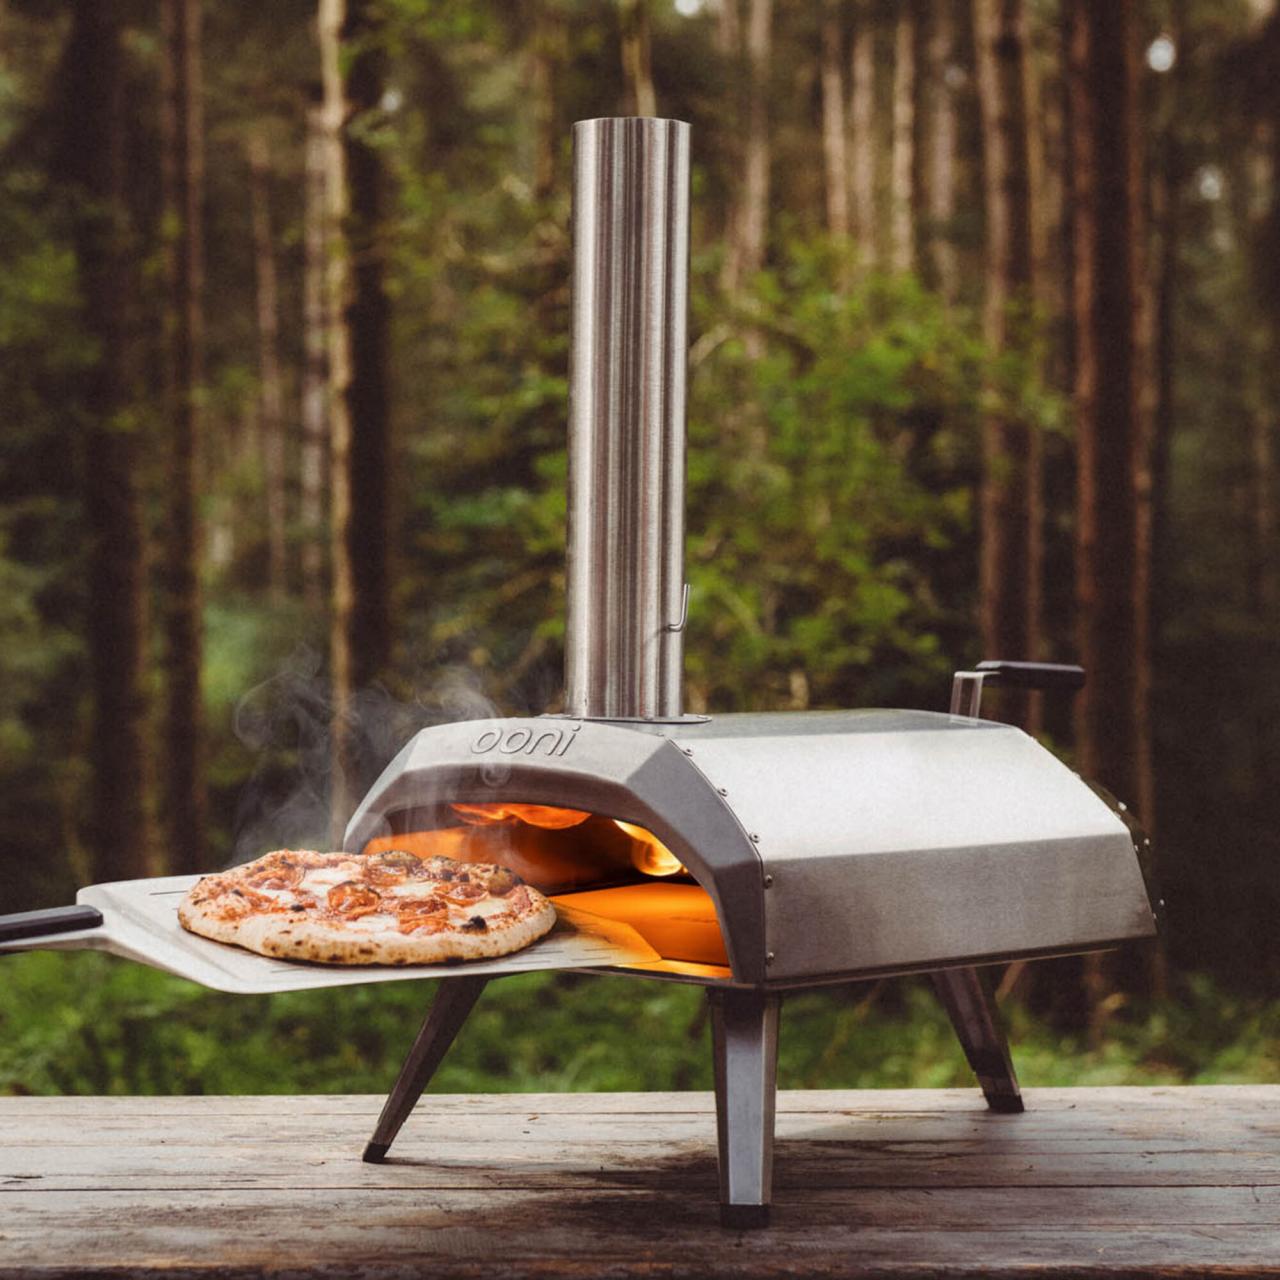 https://food.fnr.sndimg.com/content/dam/images/food/products/2020/5/13/rx_ooni-karu-wood-charcoal-fired-portable-pizza-oven.jpeg.rend.hgtvcom.1280.1280.suffix/1589384618893.jpeg